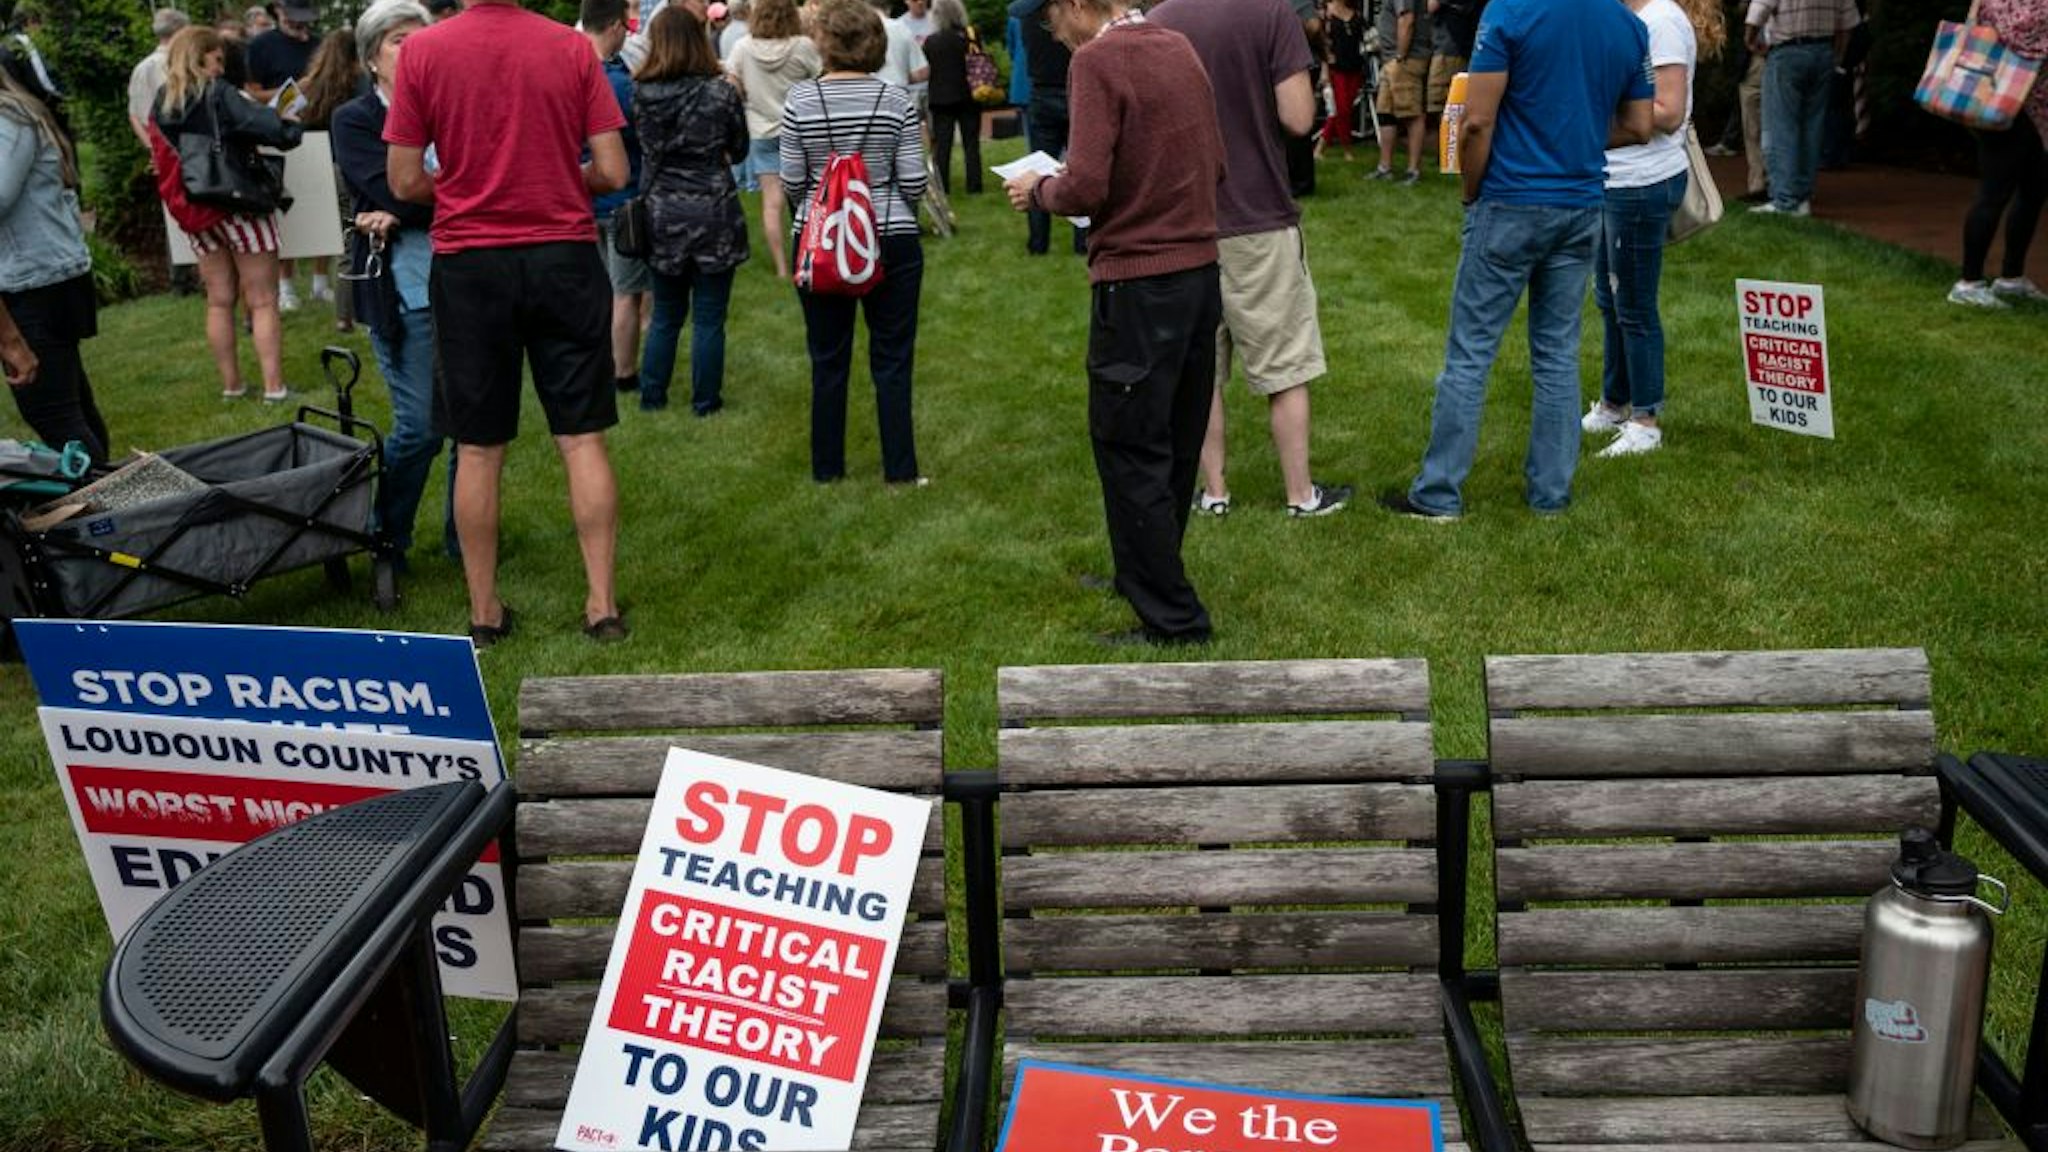 Signs are seen on a bench during a rally against "critical race theory" (CRT) being taught in schools at the Loudoun County Government center in Leesburg, Virginia on June 12, 2021. - "Are you ready to take back our schools?" Republican activist Patti Menders shouted at a rally opposing anti-racism teaching that critics like her say trains white children to see themselves as "oppressors." "Yes!", answered in unison the hundreds of demonstrators gathered this weekend near Washington to fight against "critical race theory," the latest battleground of America's ongoing culture wars. The term "critical race theory" defines a strand of thought that appeared in American law schools in the late 1970s and which looks at racism as a system, enabled by laws and institutions, rather than at the level of individual prejudices. But critics use it as a catch-all phrase that attacks teachers' efforts to confront dark episodes in American history, including slavery and segregation, as well as to tackle racist stereotypes. (Photo by ANDREW CABALLERO-REYNOLDS / AFP) (Photo by ANDREW CABALLERO-REYNOLDS/AFP via Getty Images)